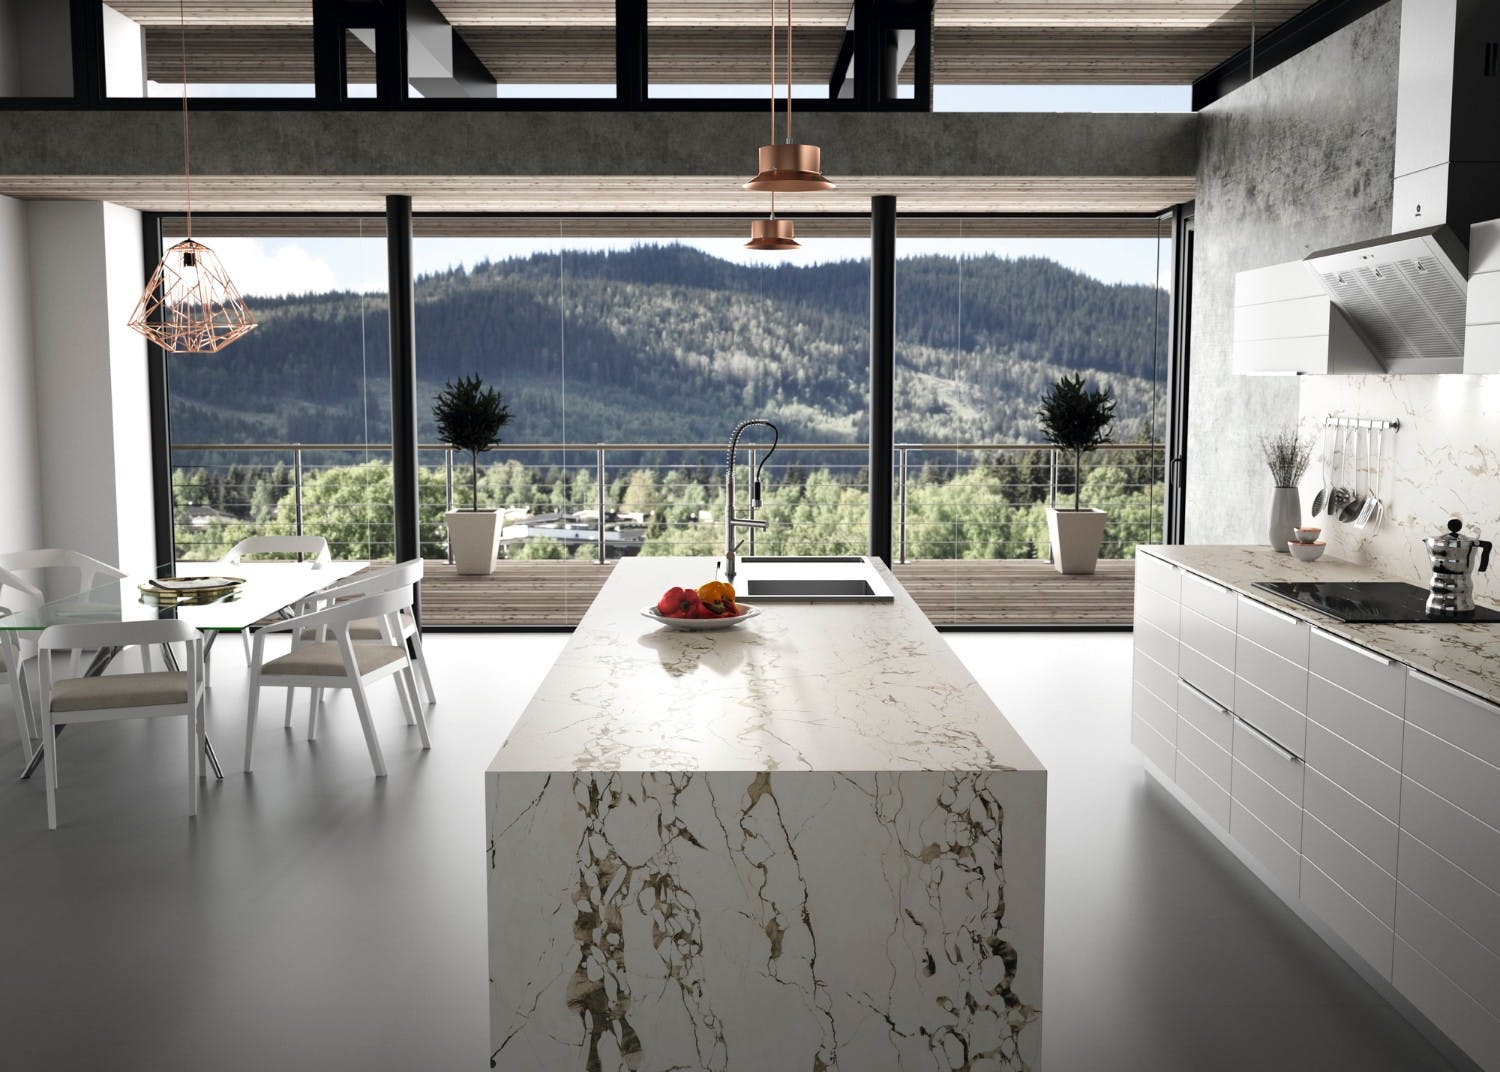 Image of RS11284 Dekton Kitchen Bedrock lpr 1 in How to design a kitchen island and get the most out of it. - Cosentino